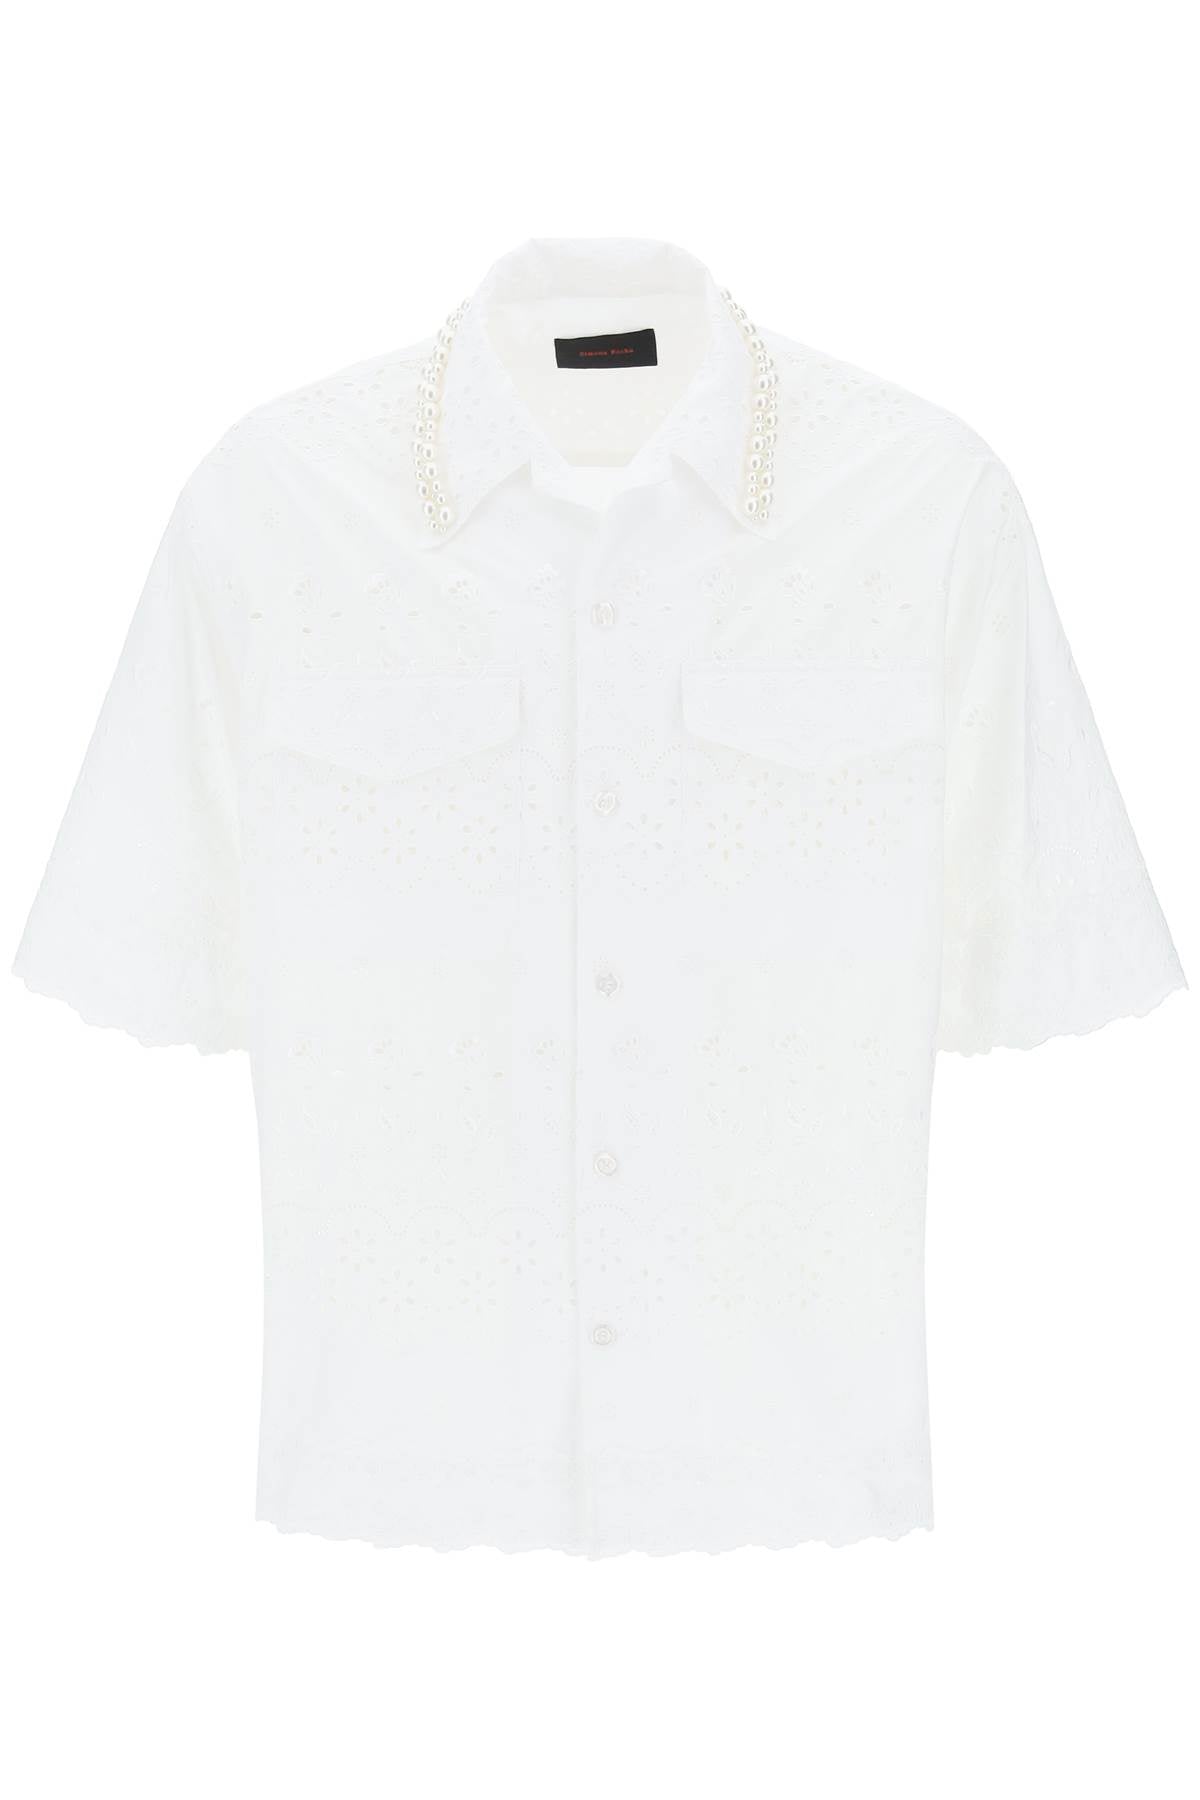 Simone rocha "scalloped lace shirt with pearl-0